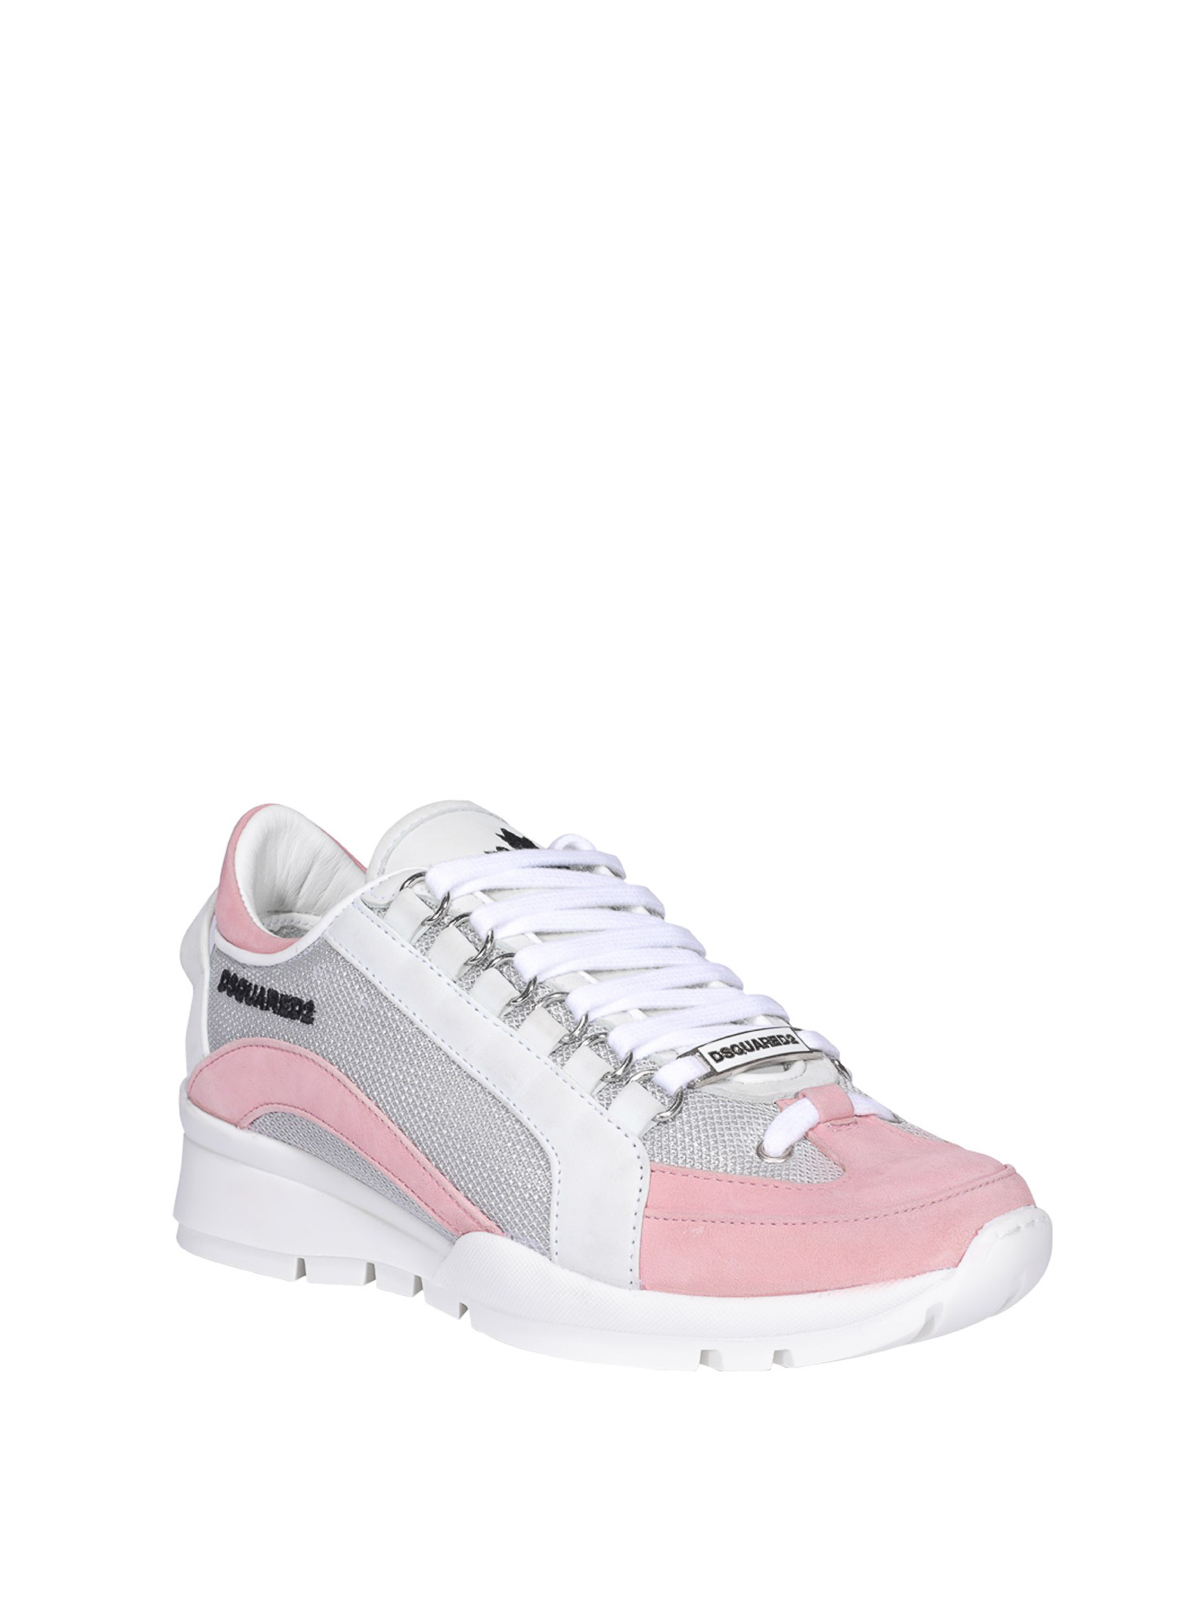 Praten tegen Afrika Bibliografie Trainers Dsquared2 - 551 white and pink sneakers - SNW050508102683M1824